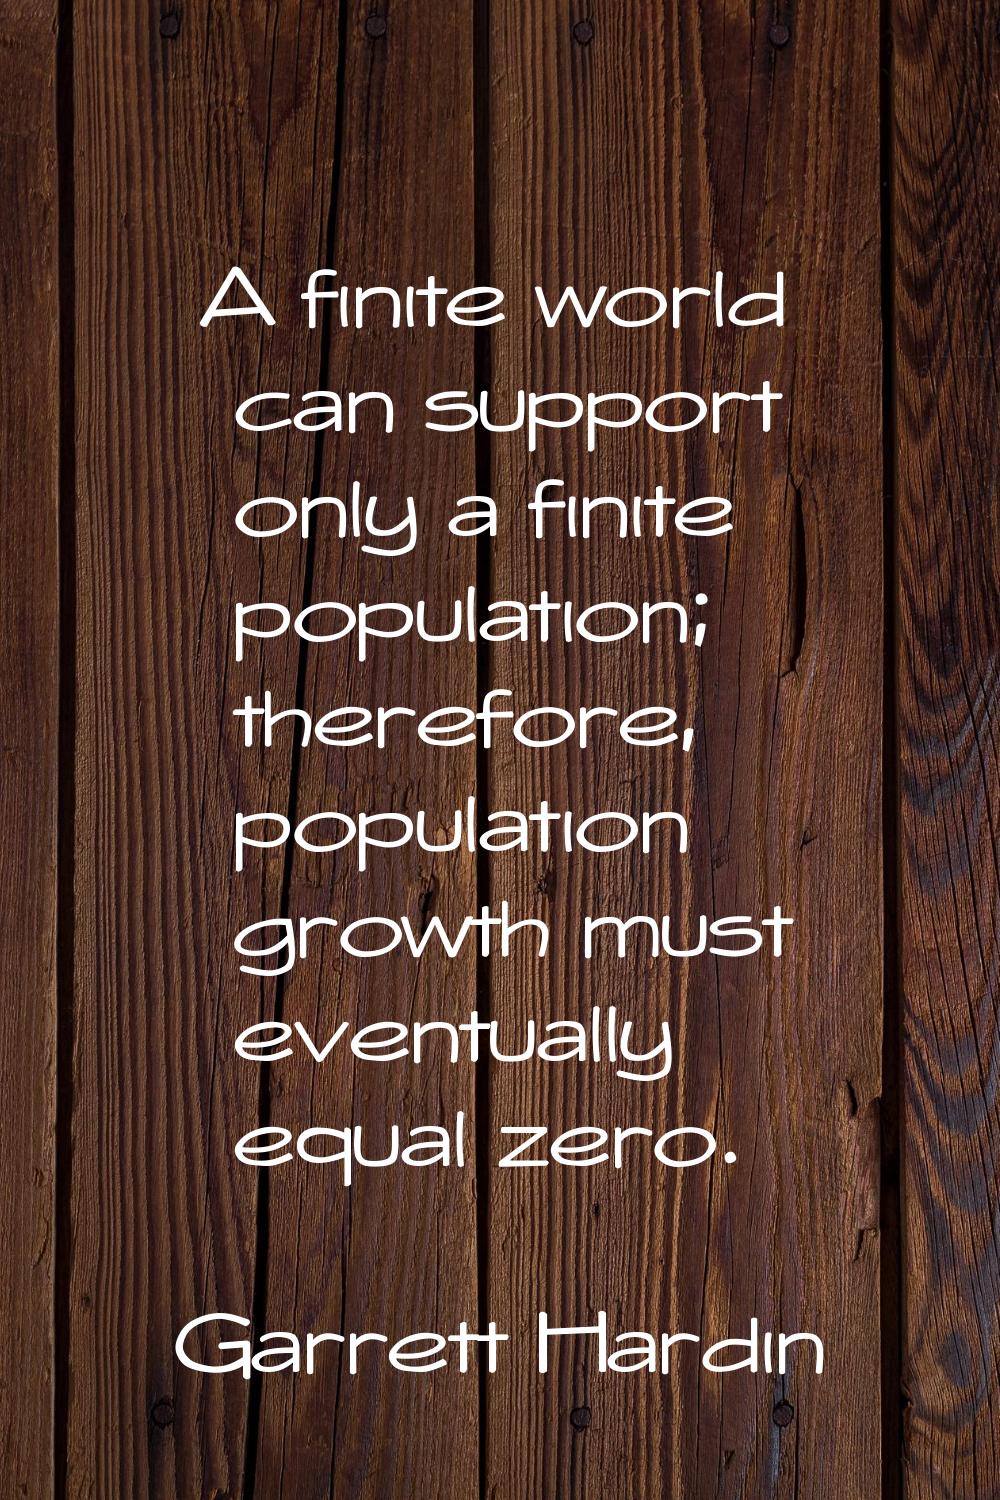 A finite world can support only a finite population; therefore, population growth must eventually e